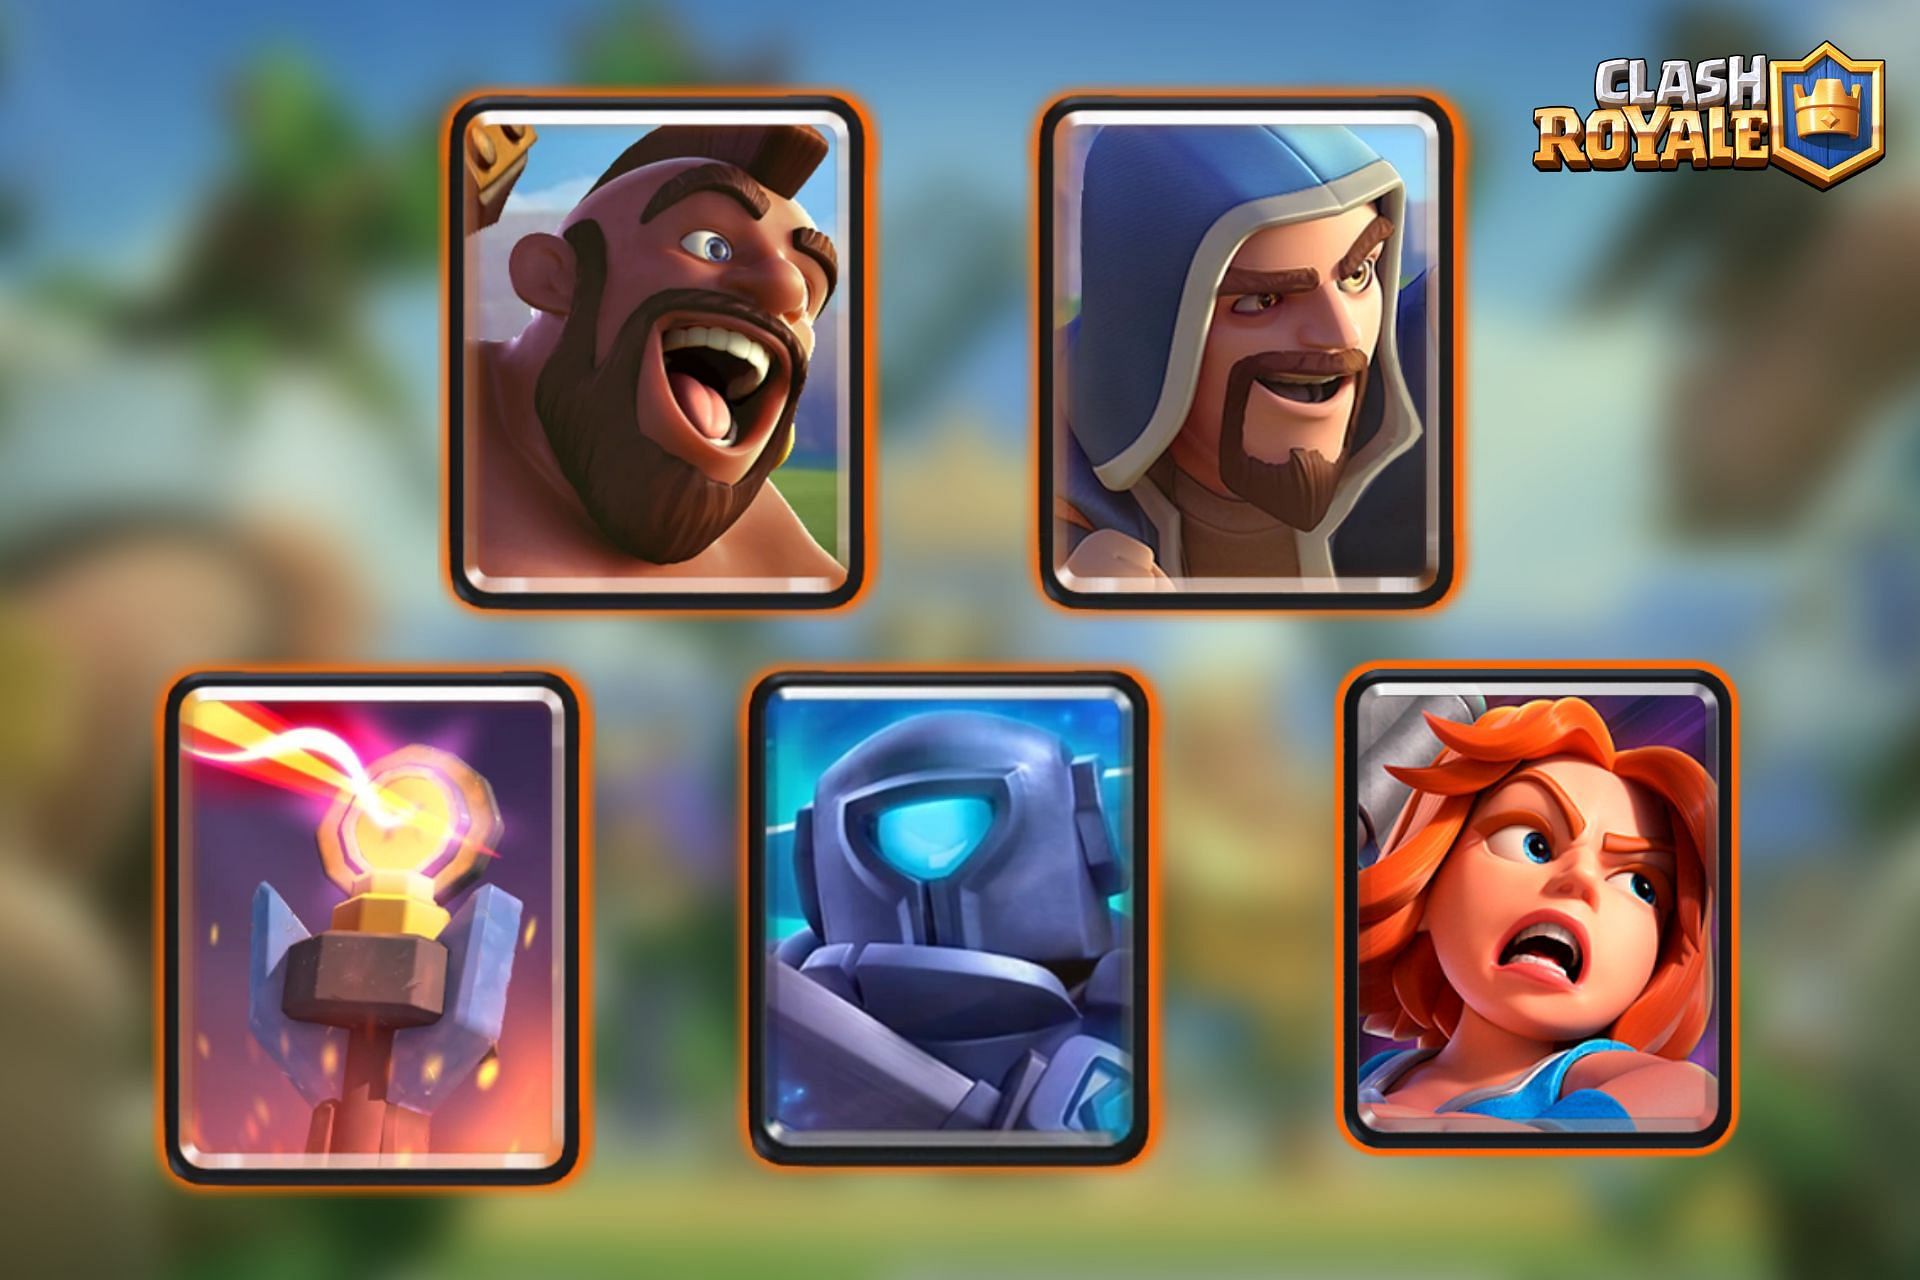 Rare cards for the Royal Tournament in Clash Royale (Image via Sportskeeda)